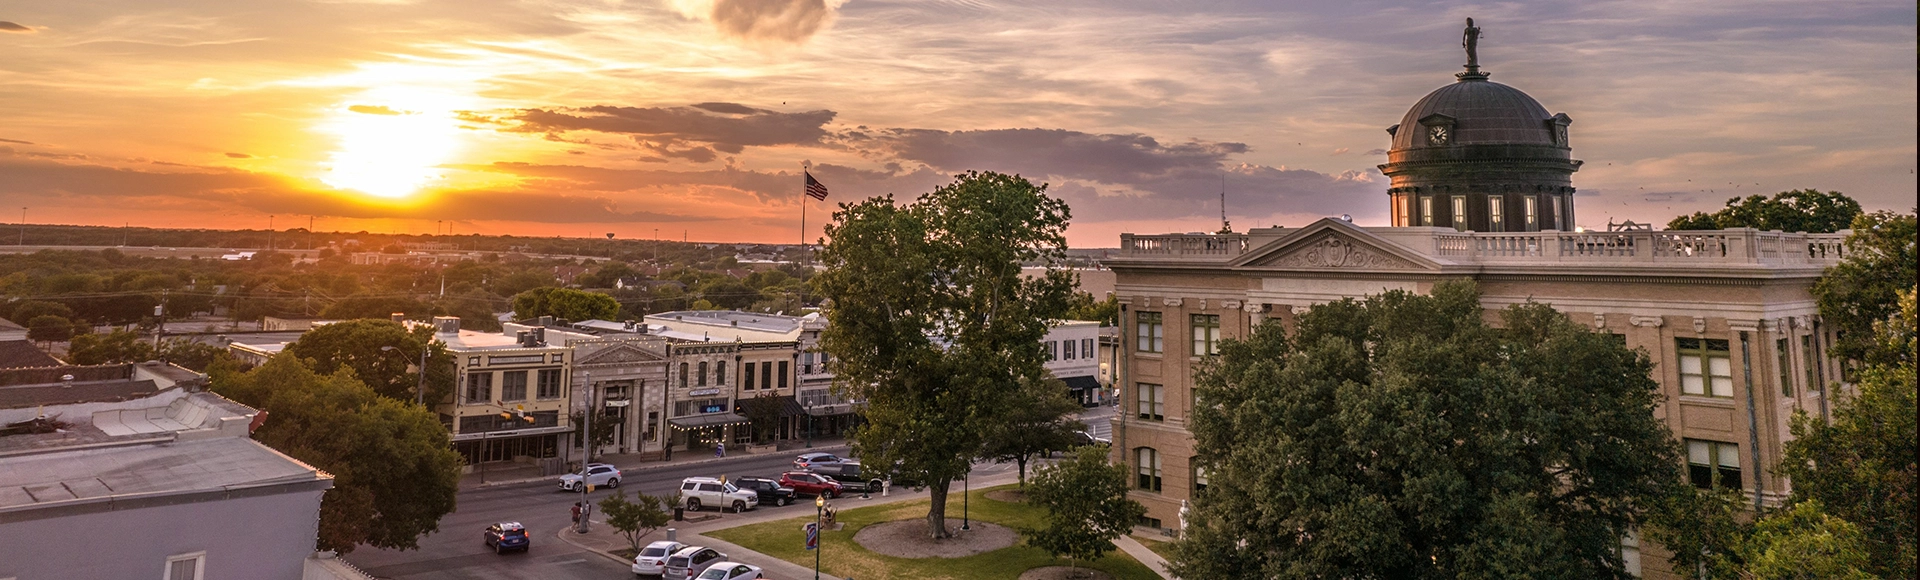 Architecture of Courthouse in Georgetown, Texas with street view, cars, greenery at sunset